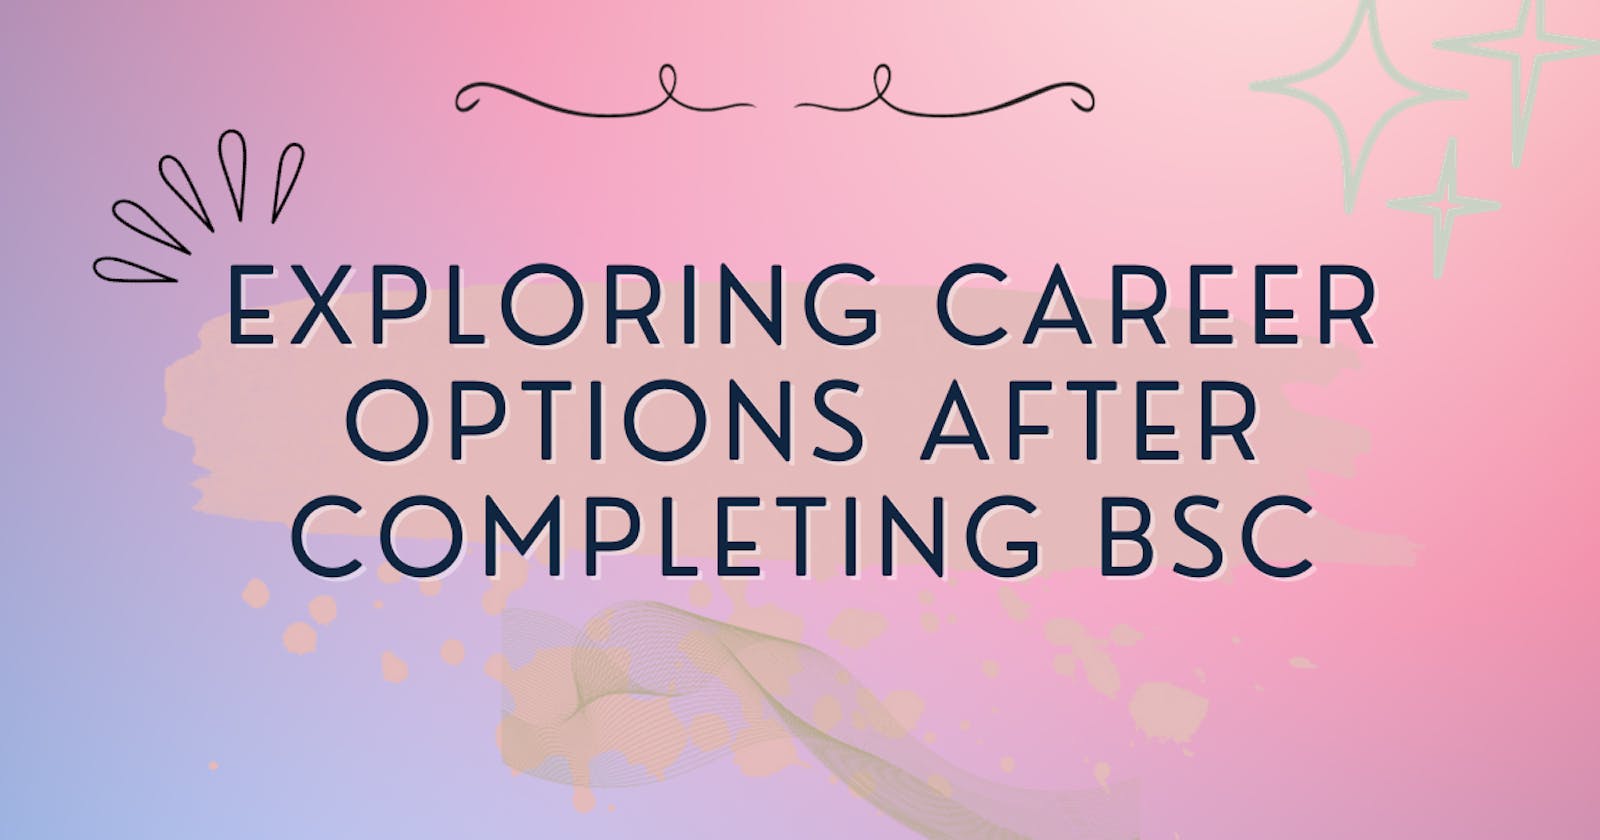 Exploring Career Options After Completing BSc